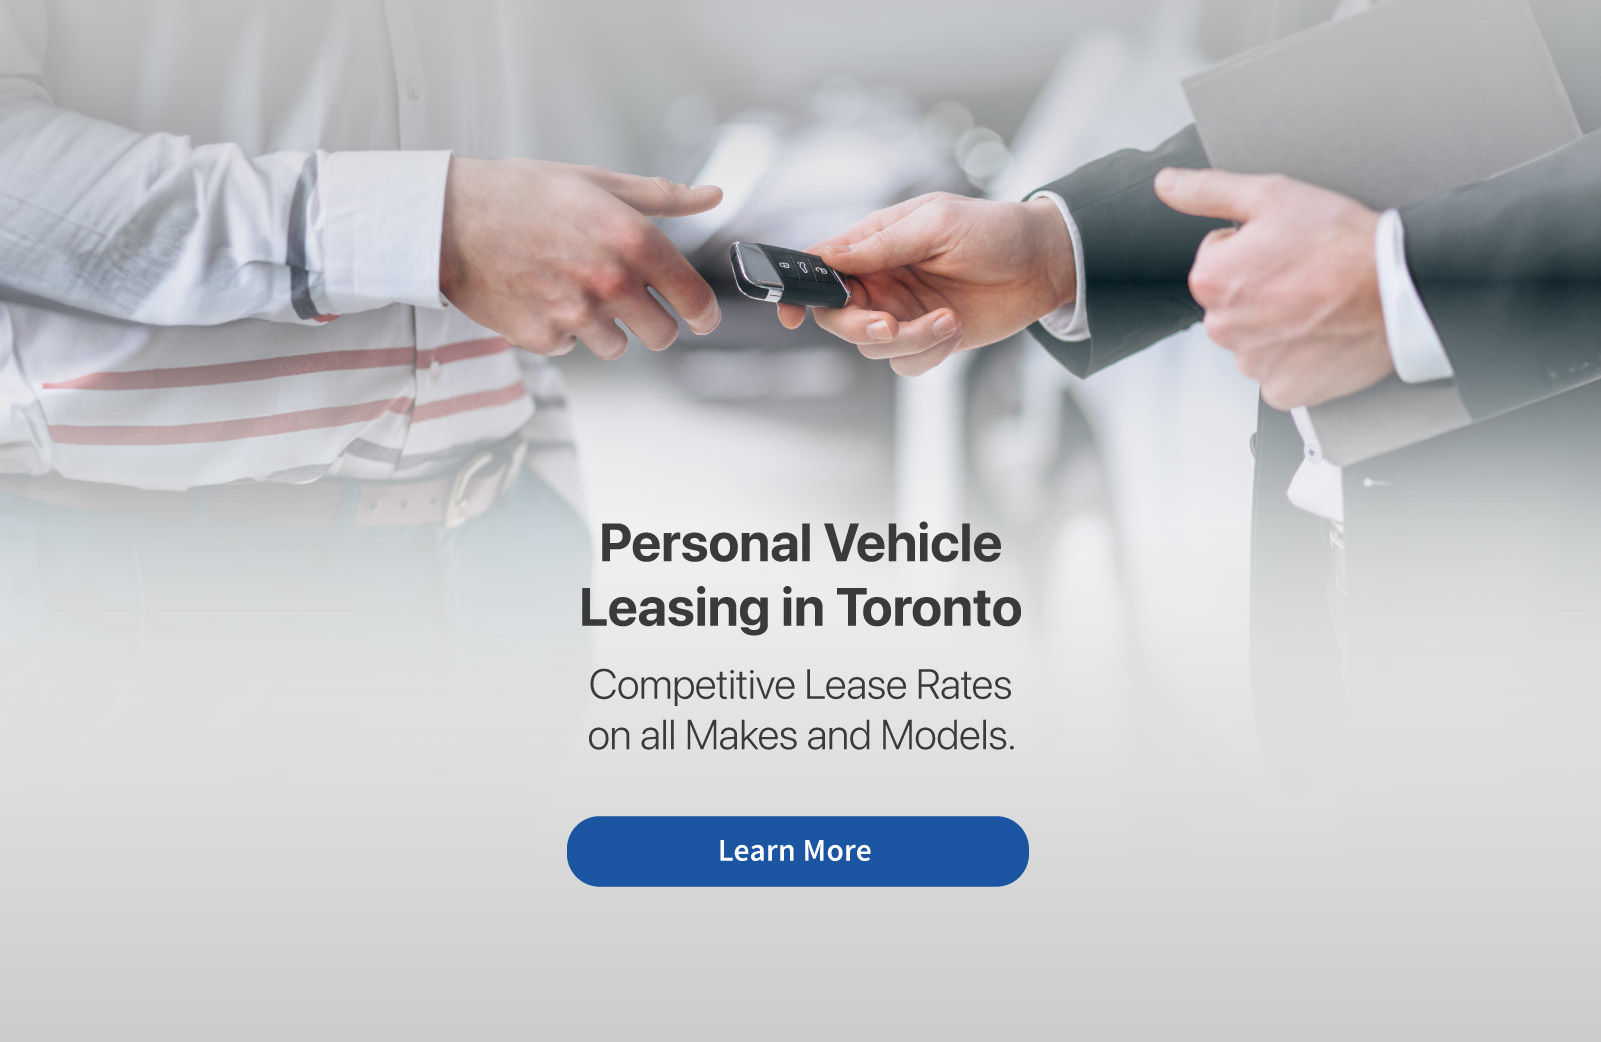 Personal Vehicle Leasing in Toronto